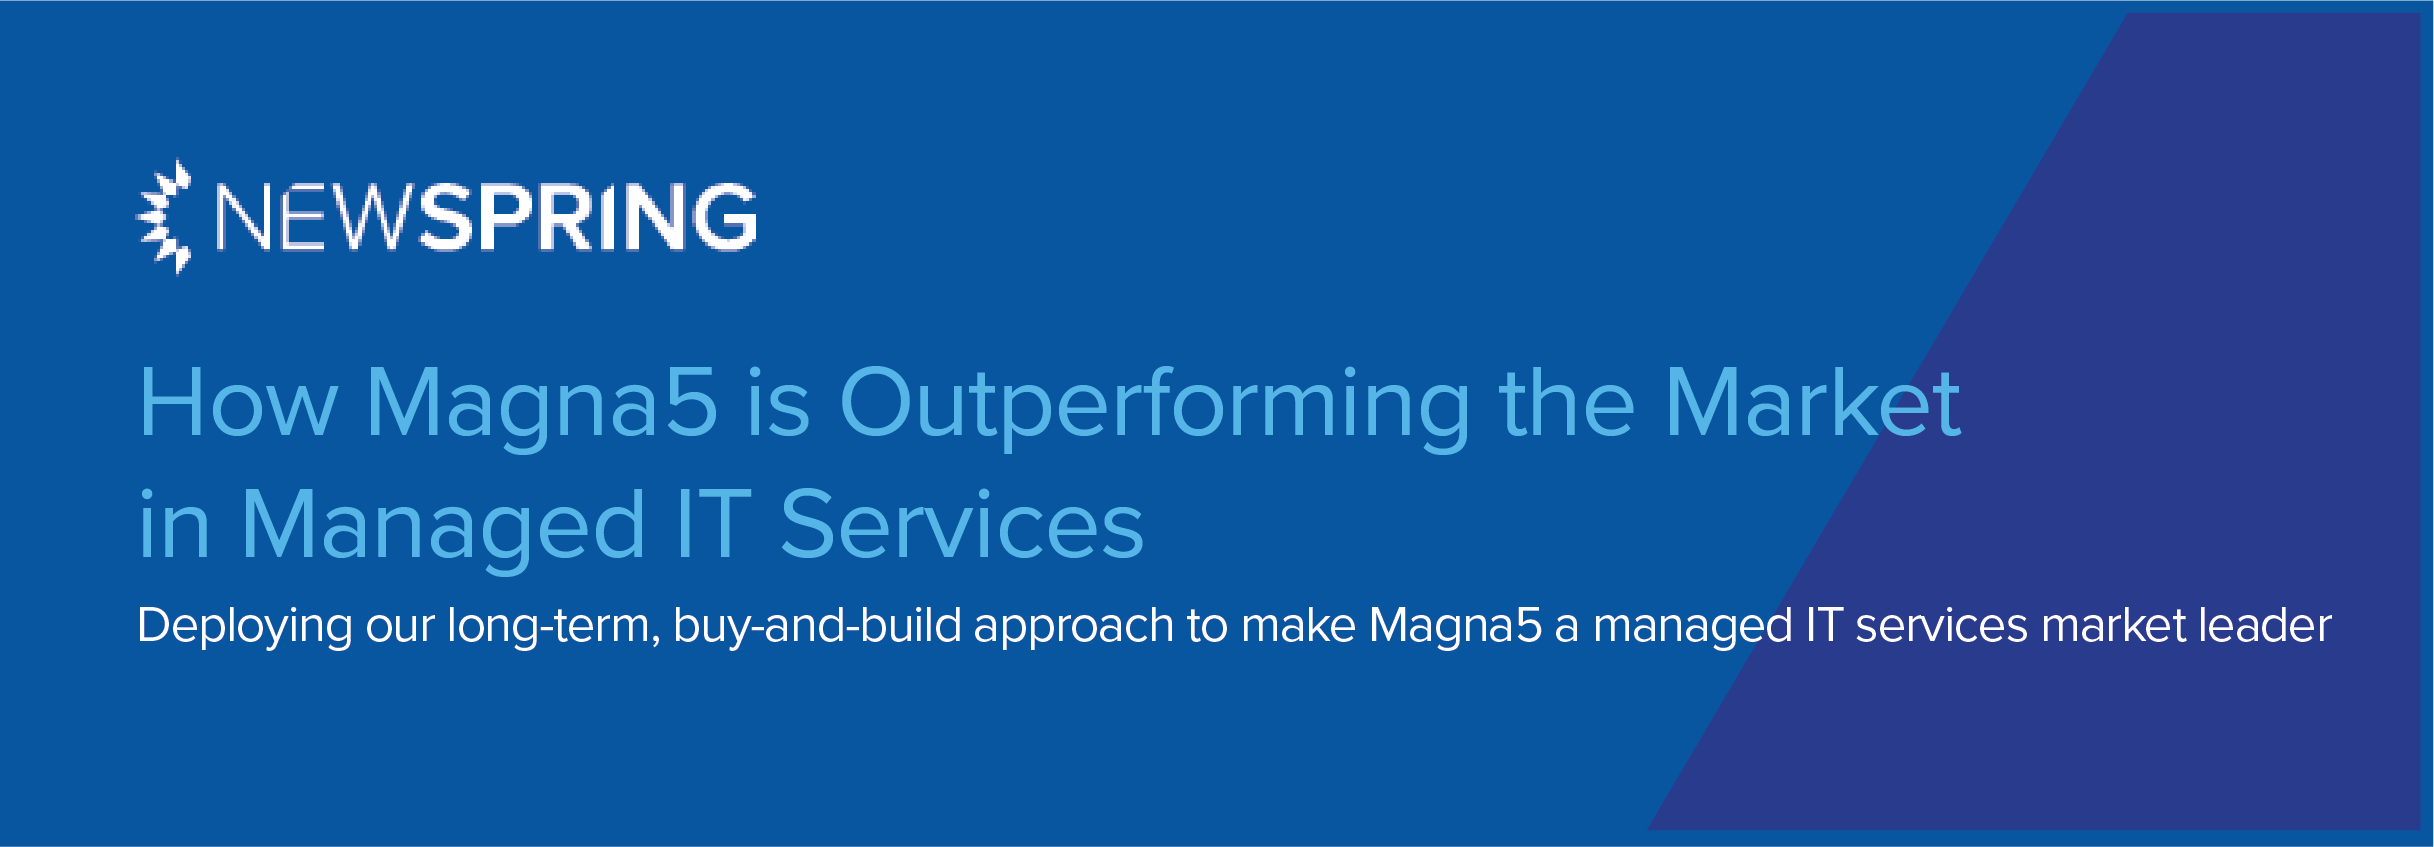 How Magna5 is Outperforming the Market in Managed IT Services